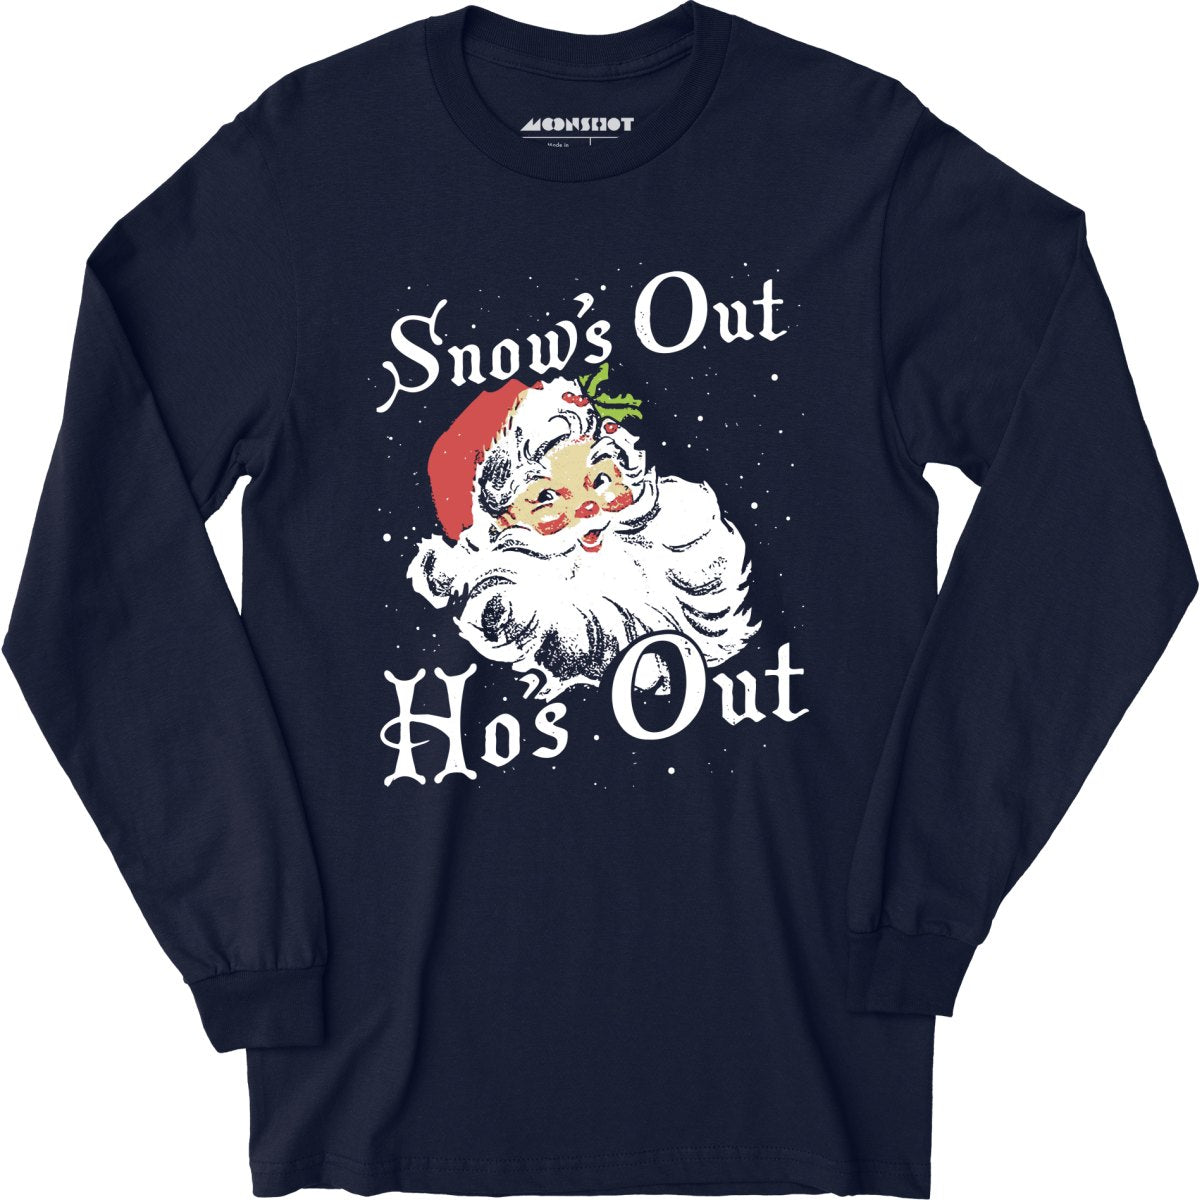 Snow's Out Ho's Out - Long Sleeve T-Shirt